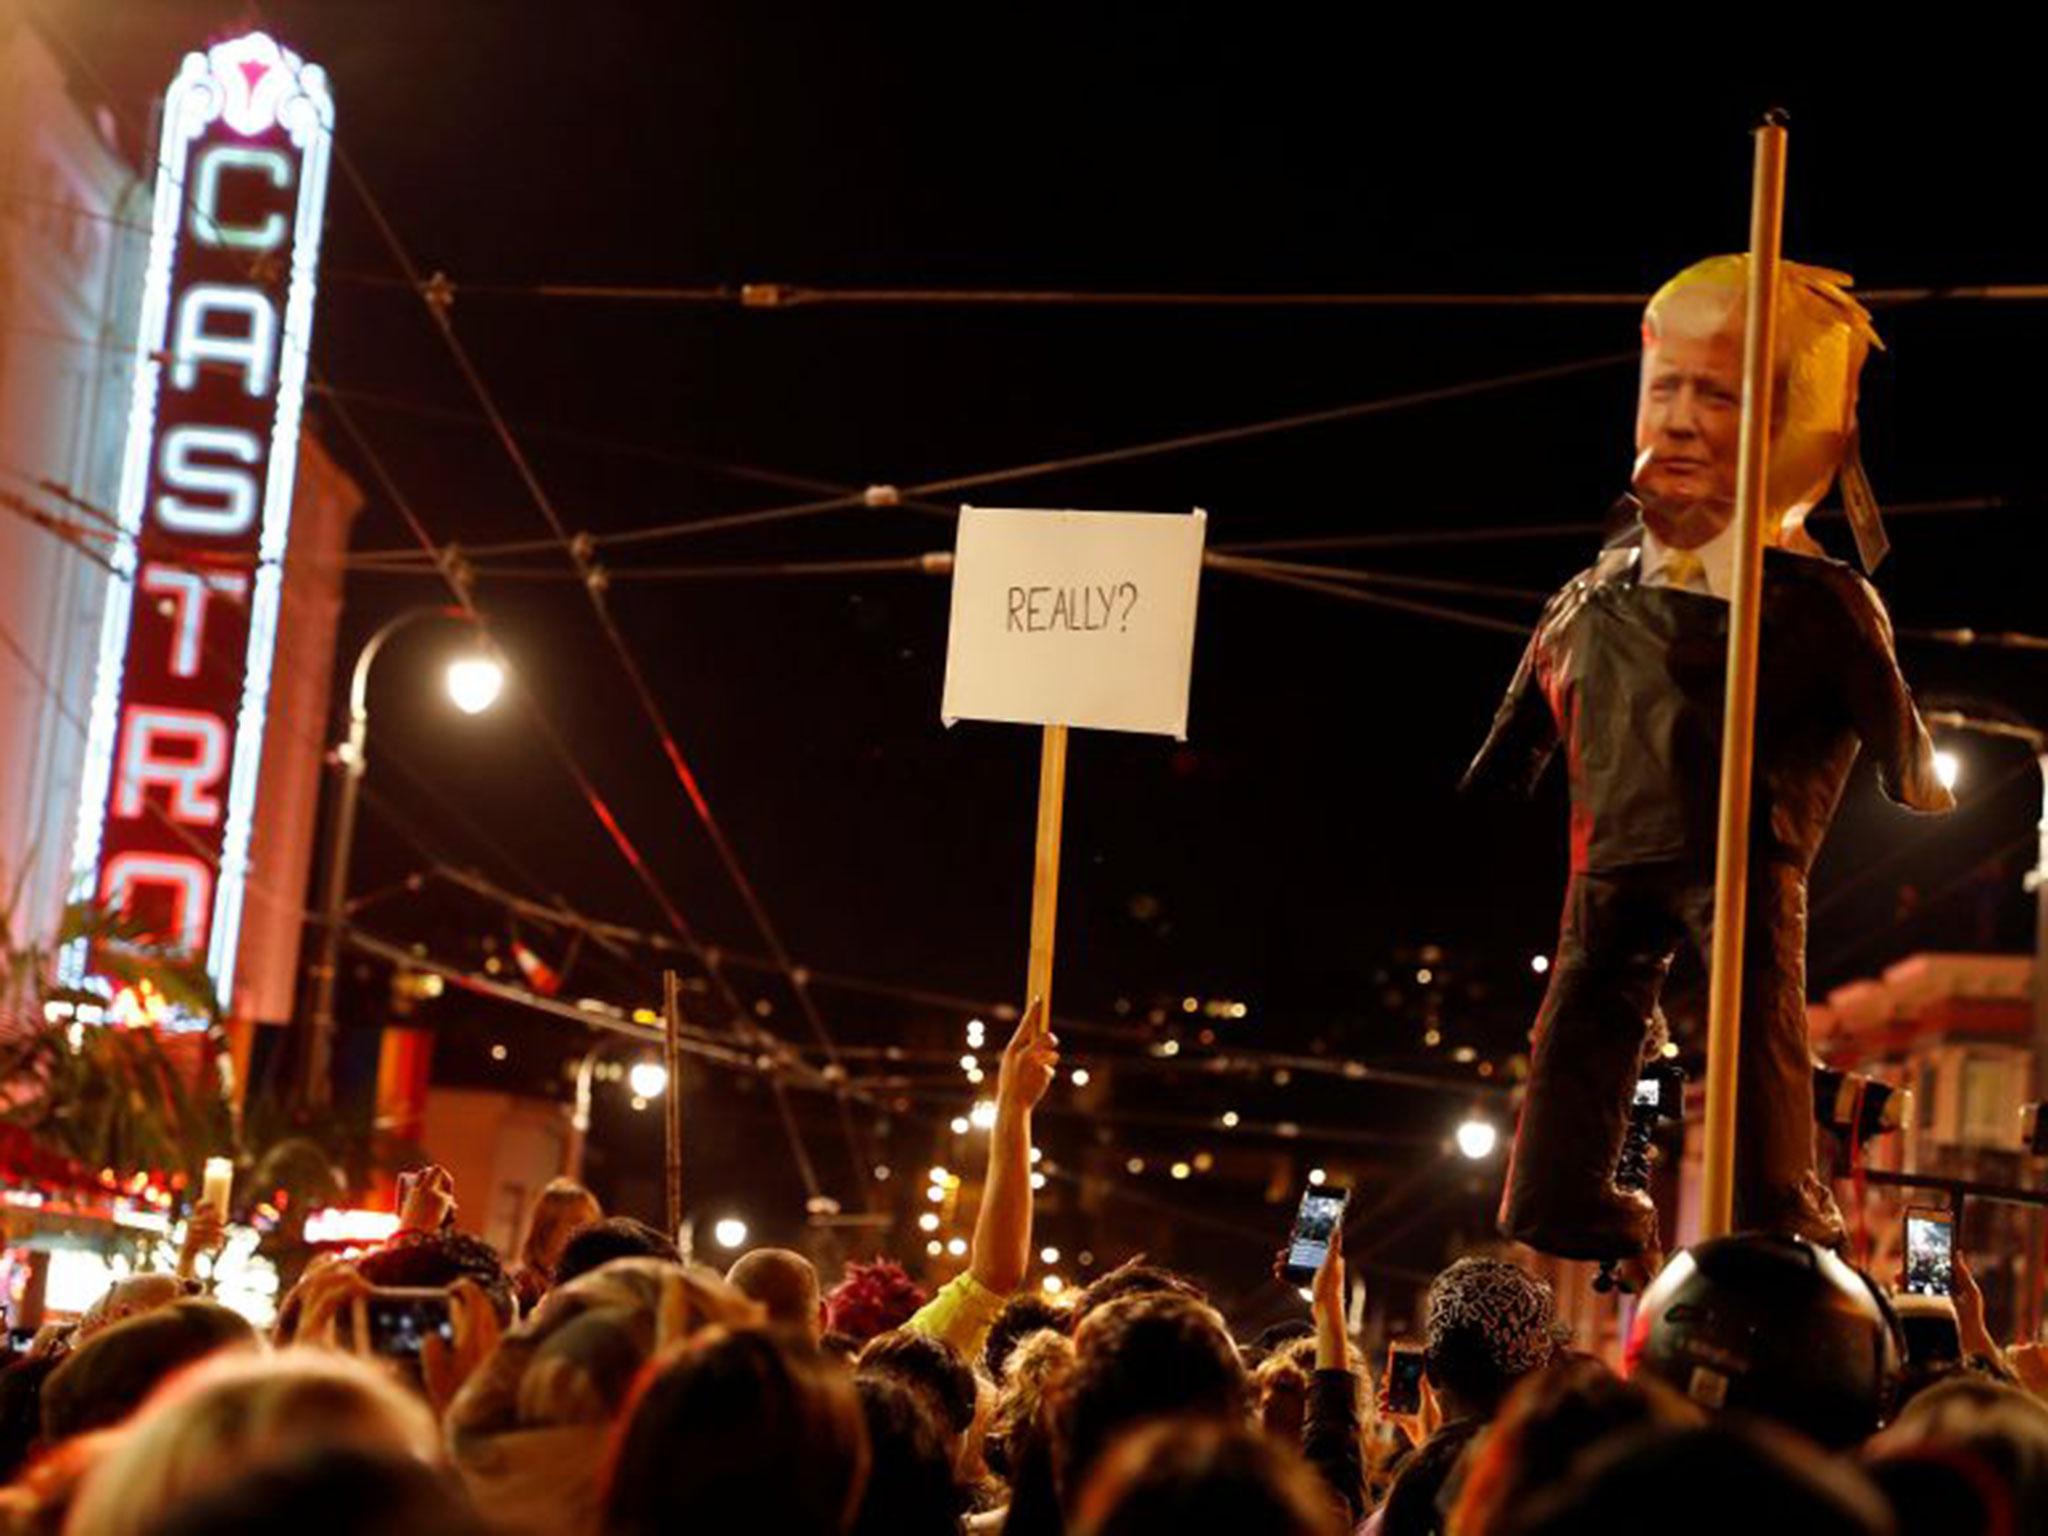 A demonstrator holds a sign next to a pinata depicting Donald Trump during a demonstration in San Francisco, California